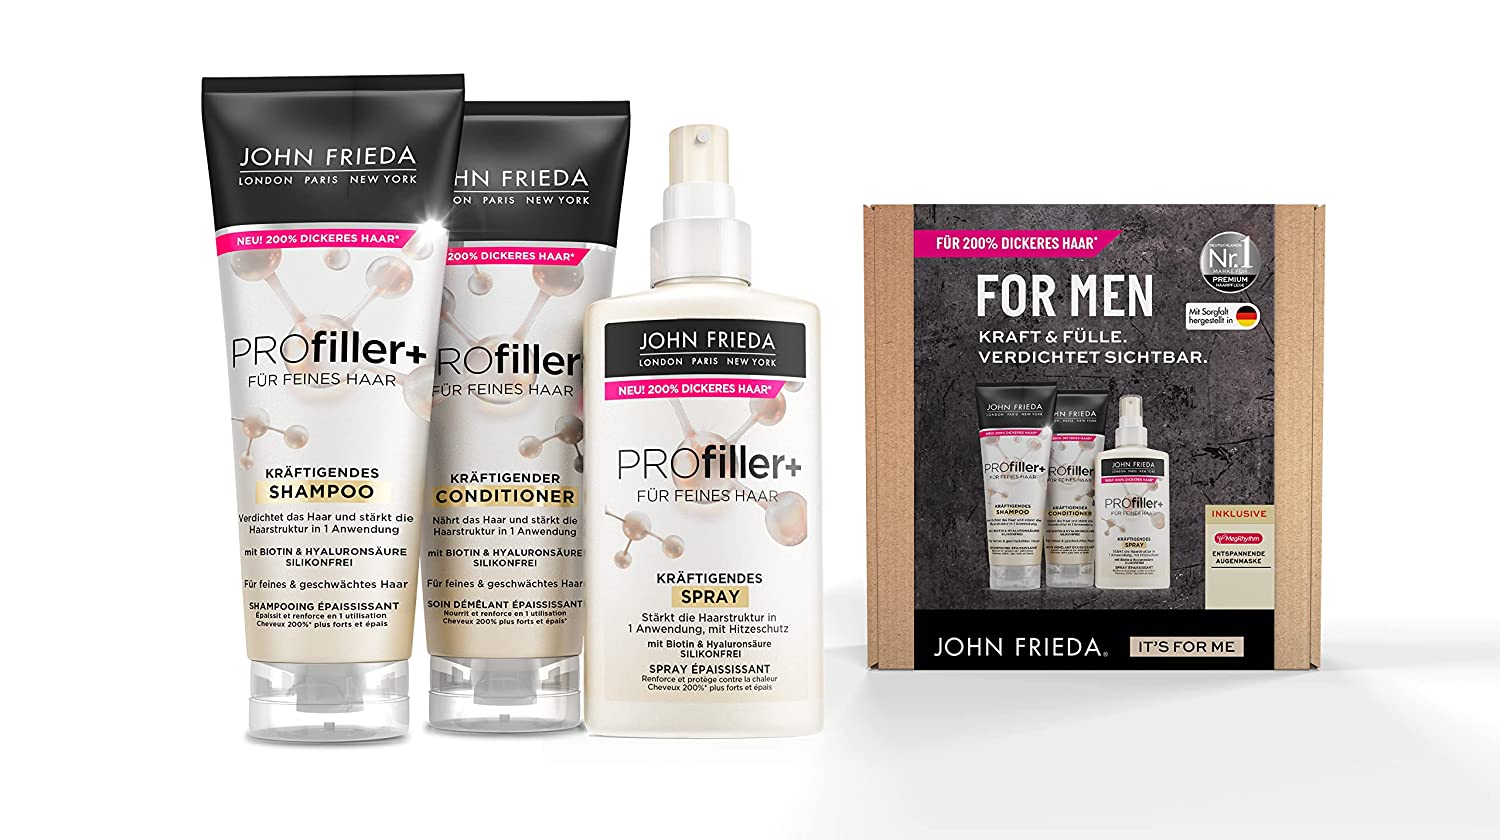 John Frieda Profiller + Value Set - Perfect for Fine Men \ 'S Hair - Contents: Shampoo 250 ML + Conditioner 250 ml + Strengensing Spray 150 ML - Provides Hair with Power Active Ingredients